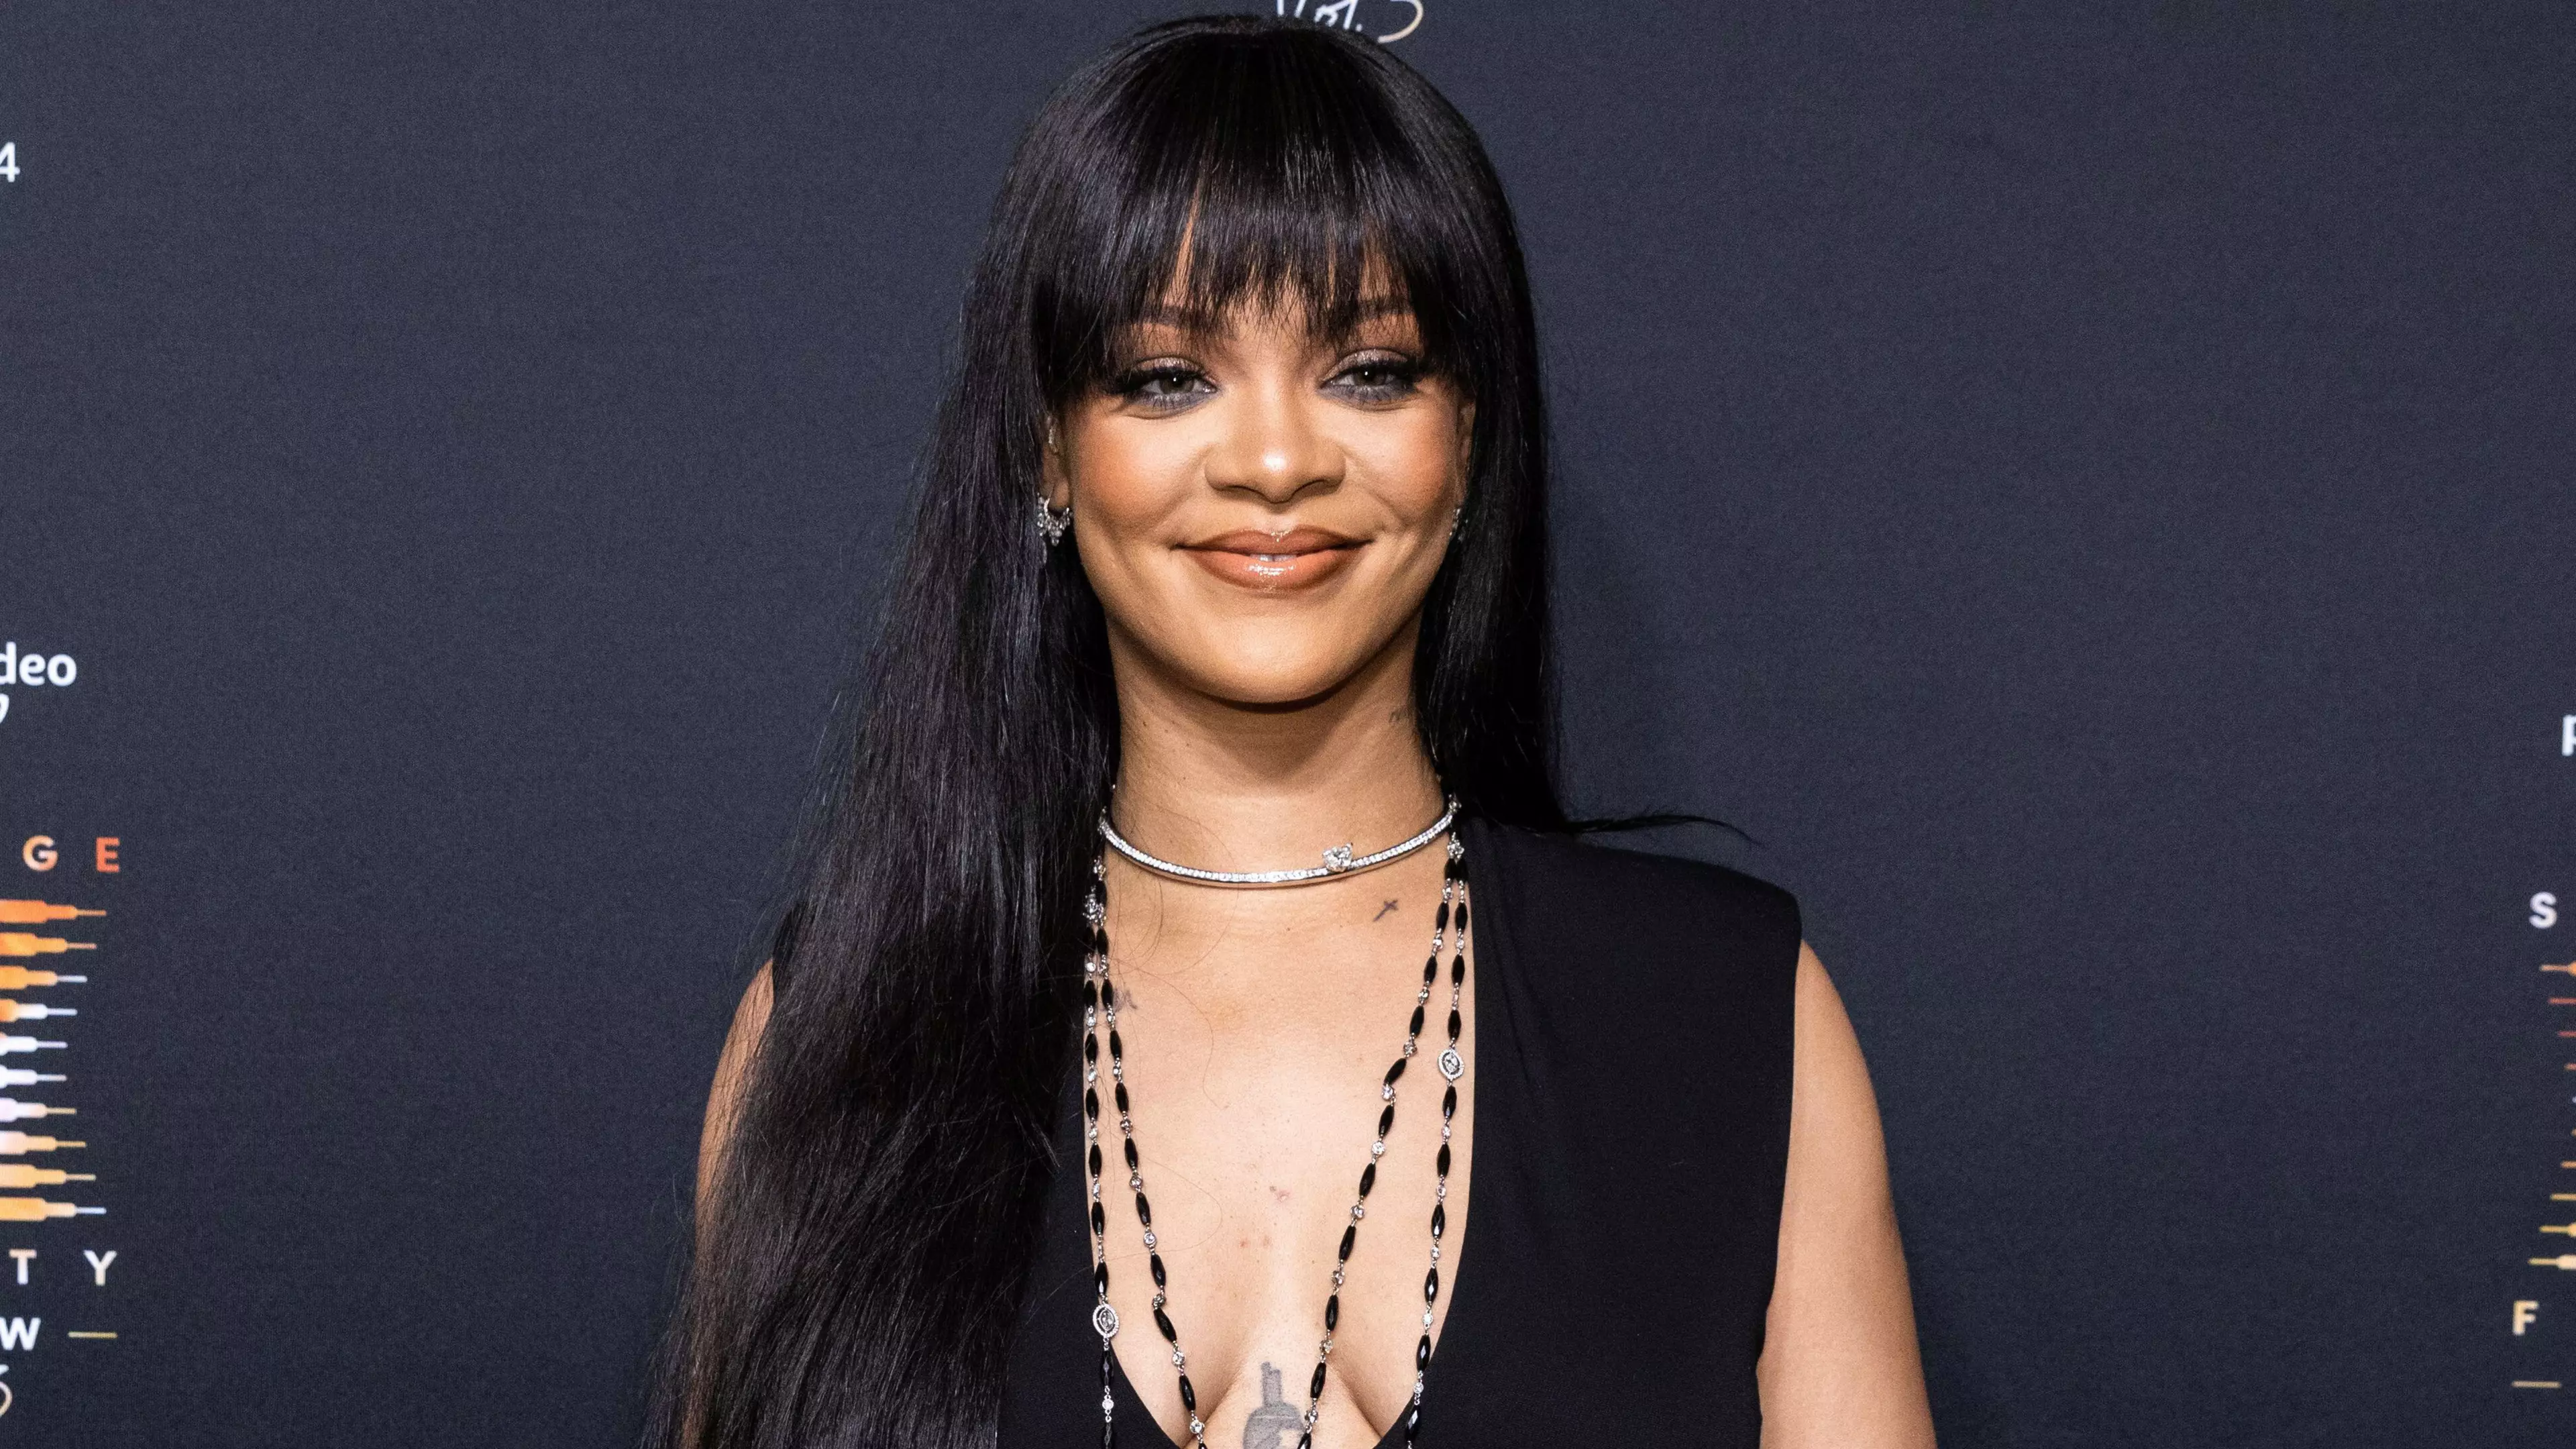 Rihanna Accused Of Cultural Appropriation For Putting Models In Braids For Fashion Show